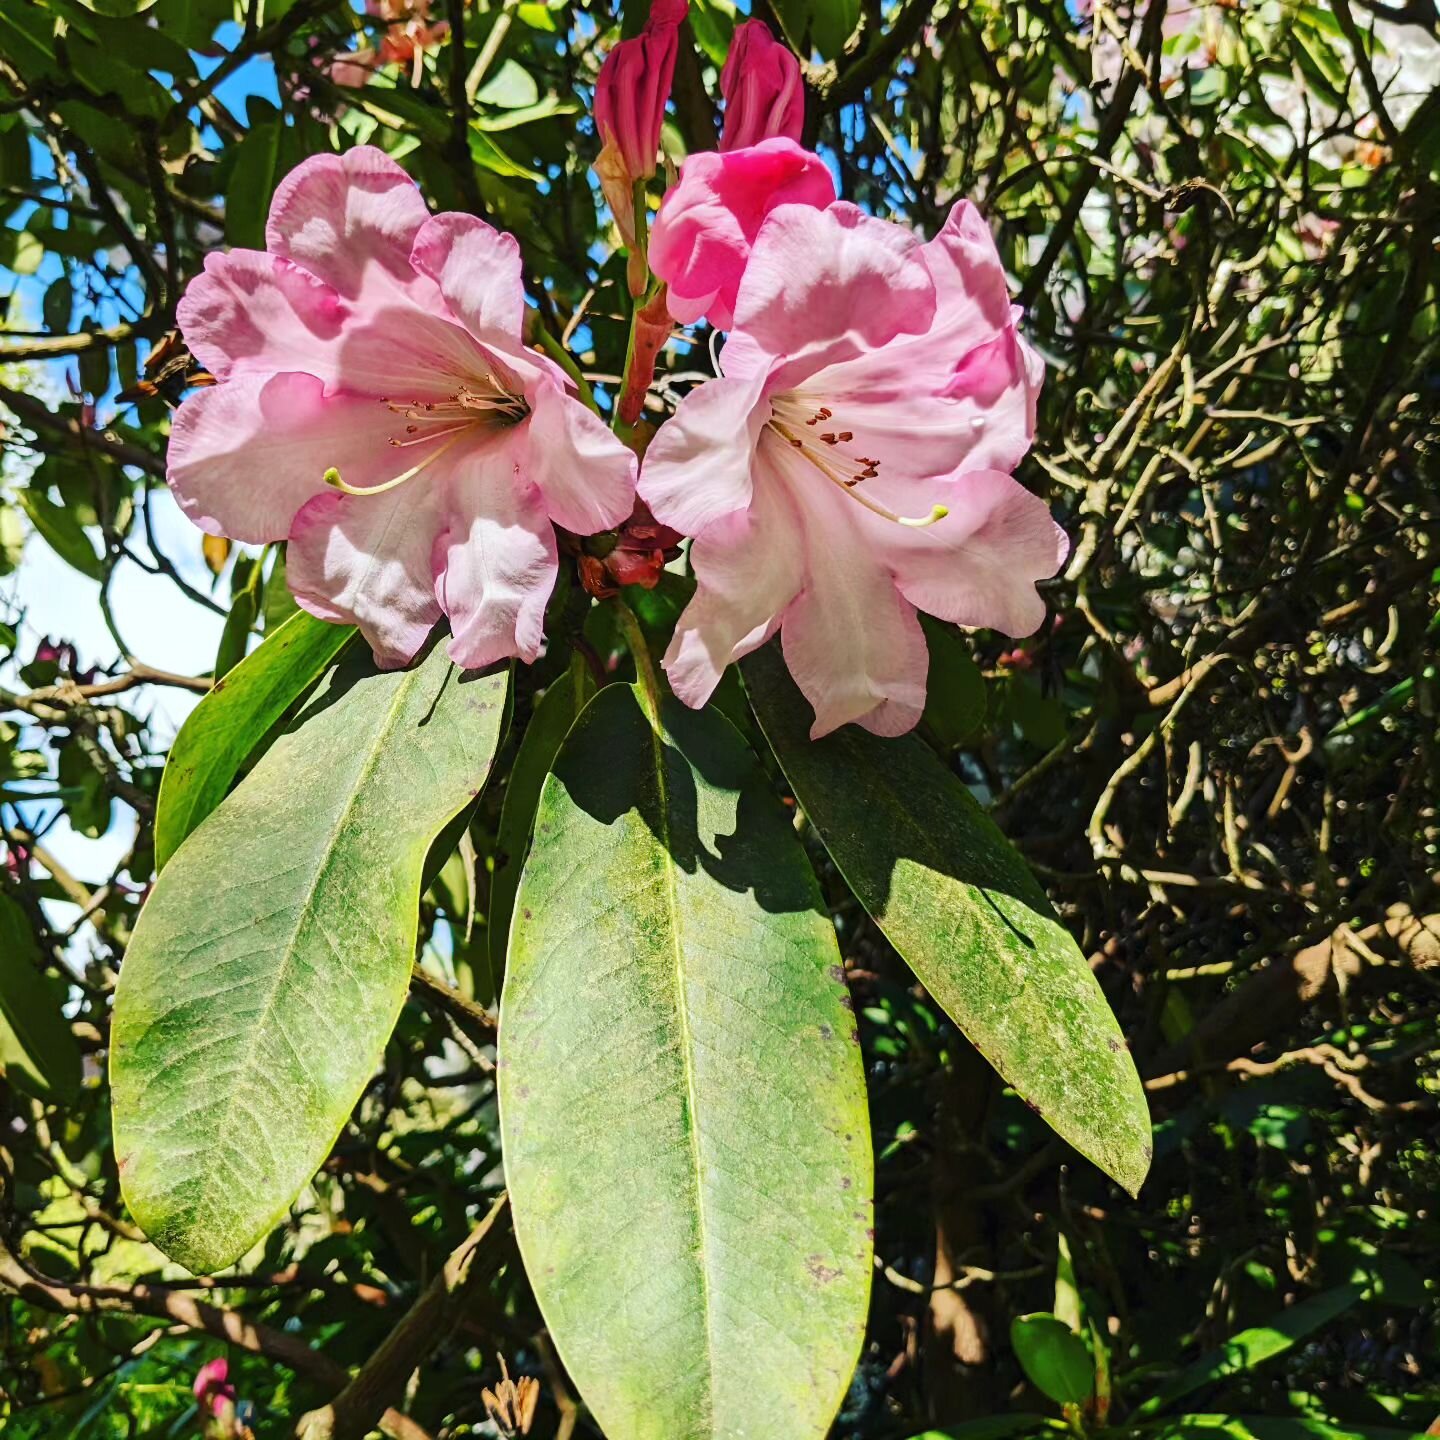 Rhododendron time has begun..... Head to the Wood Garden and enjoy.

___________________________________________

#rhododendrongarden #rhododendroncollection #rhododendronseason #woodgarden #rhodoseason #may #flowers #rhododendrons #gw2for1 #historic